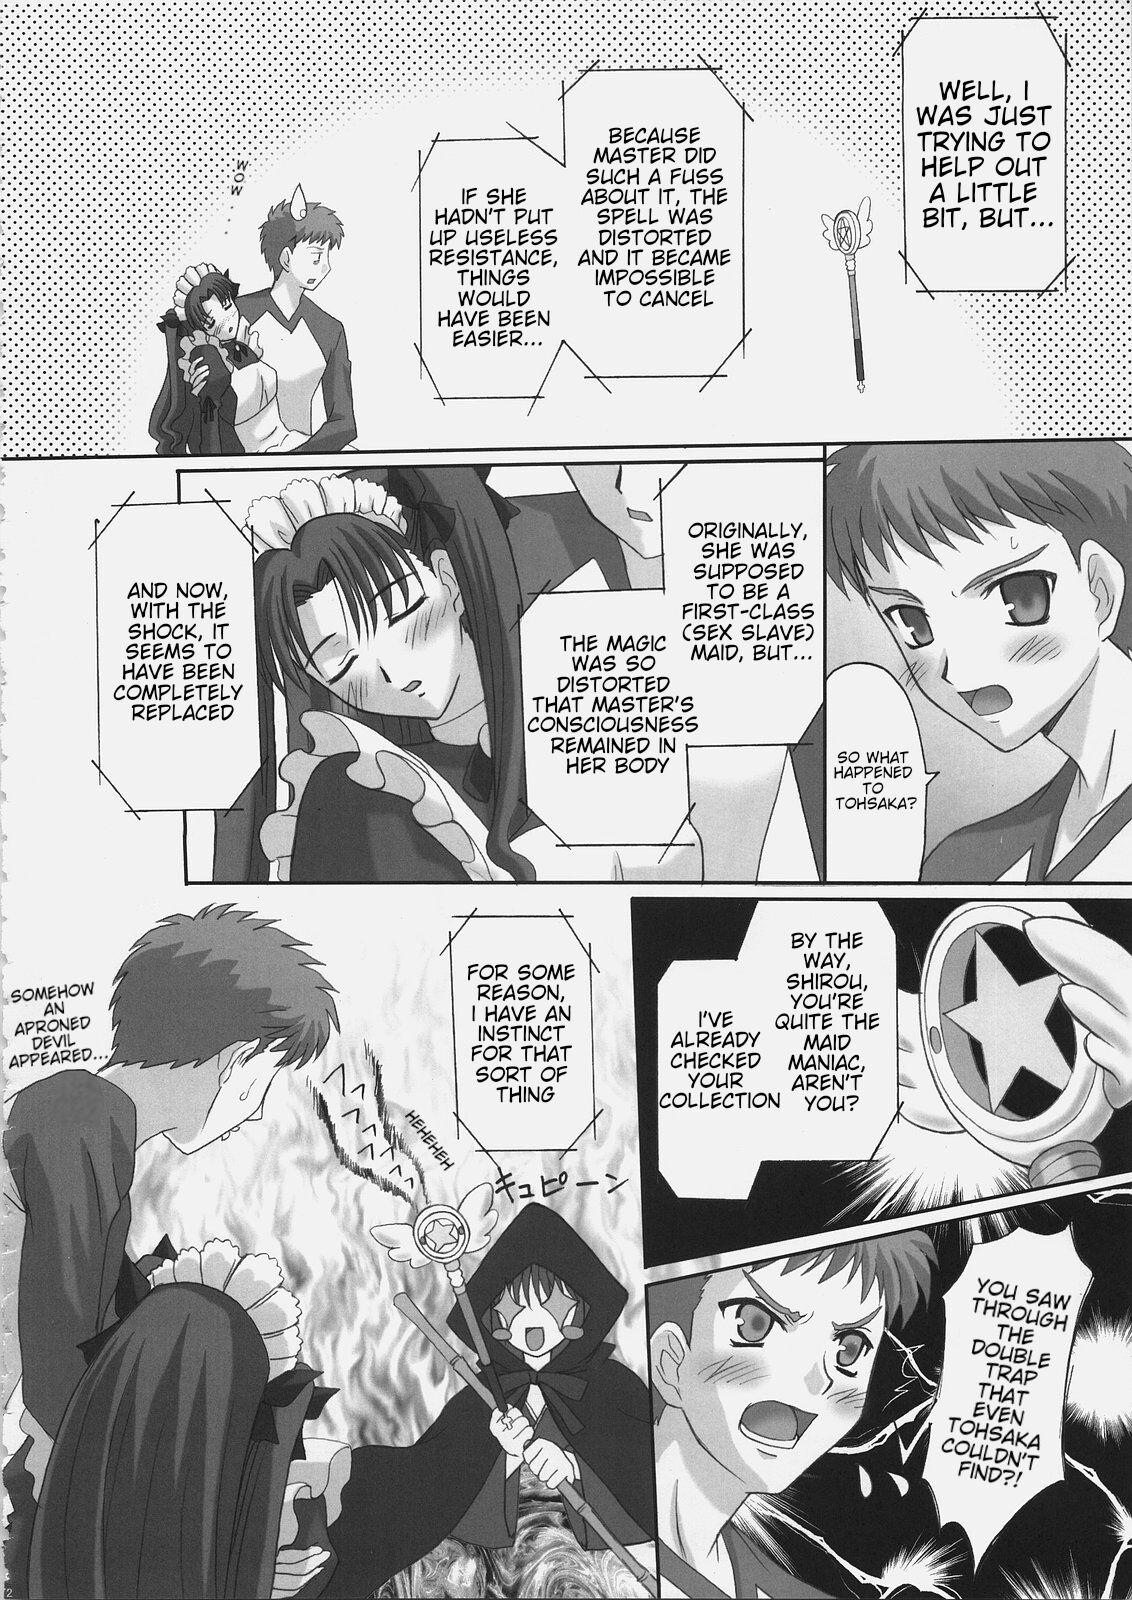 Rico EX PERIENCE - Fate stay night Stroking - Page 11